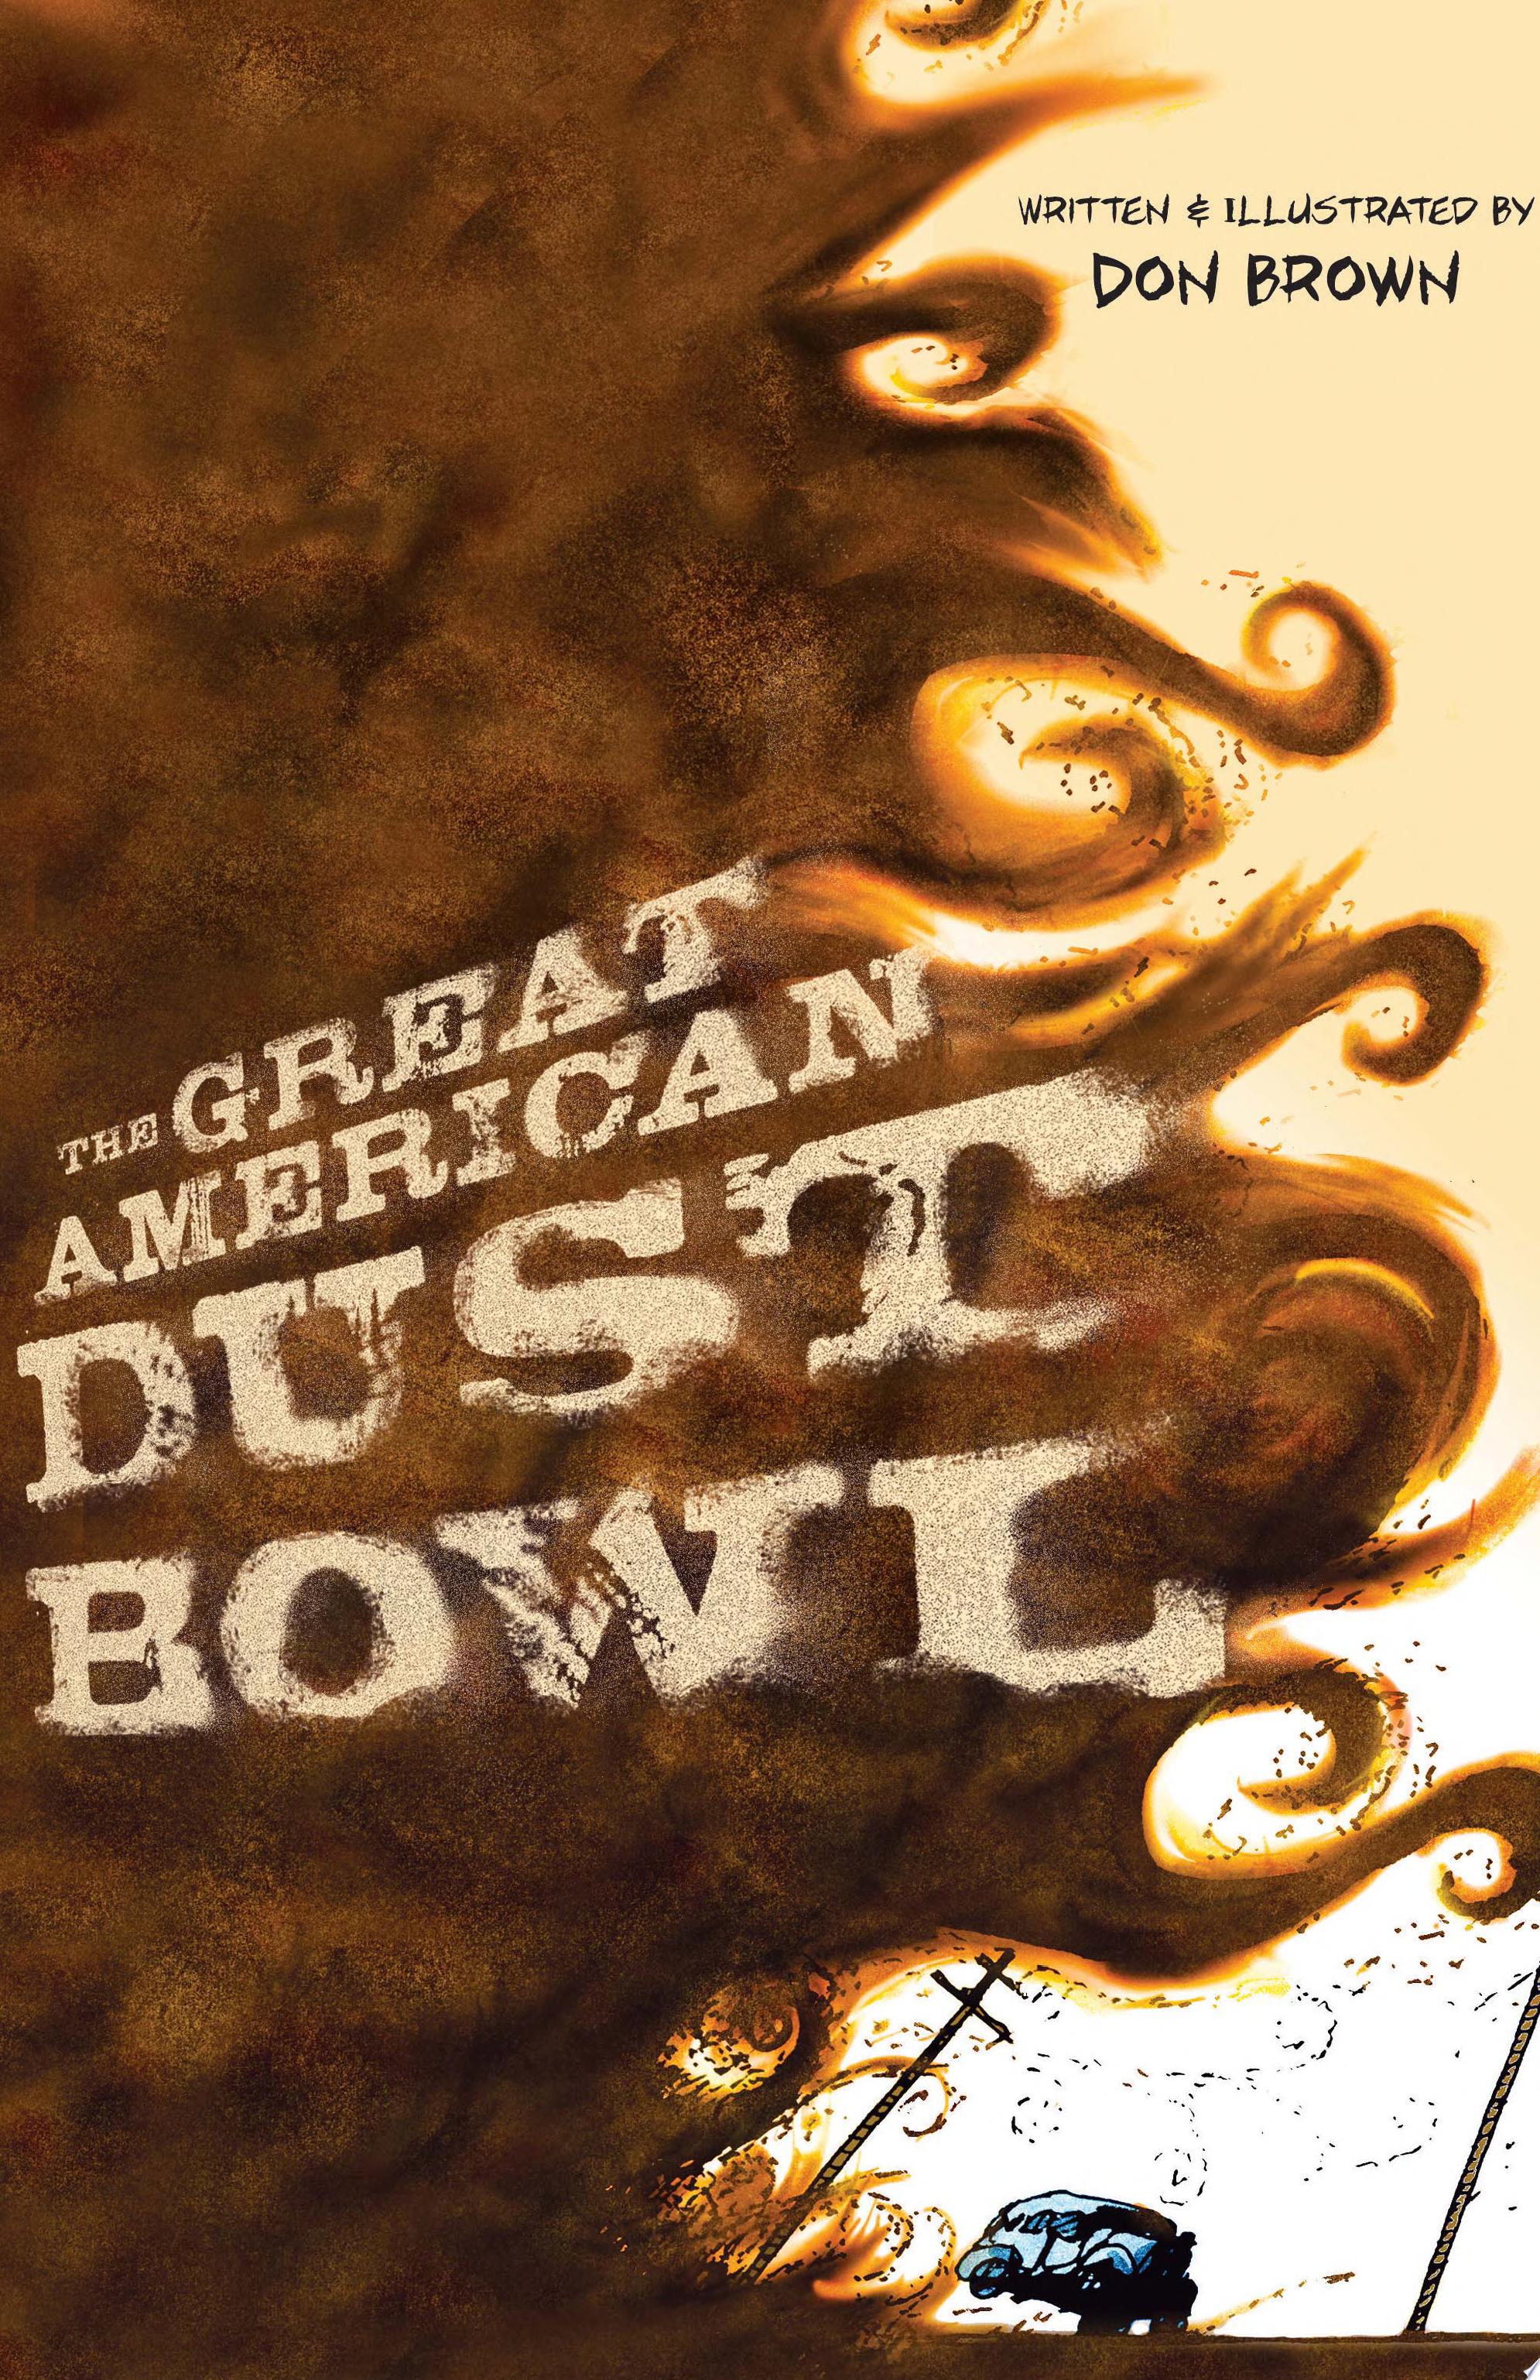 Image for "The Great American Dust Bowl"